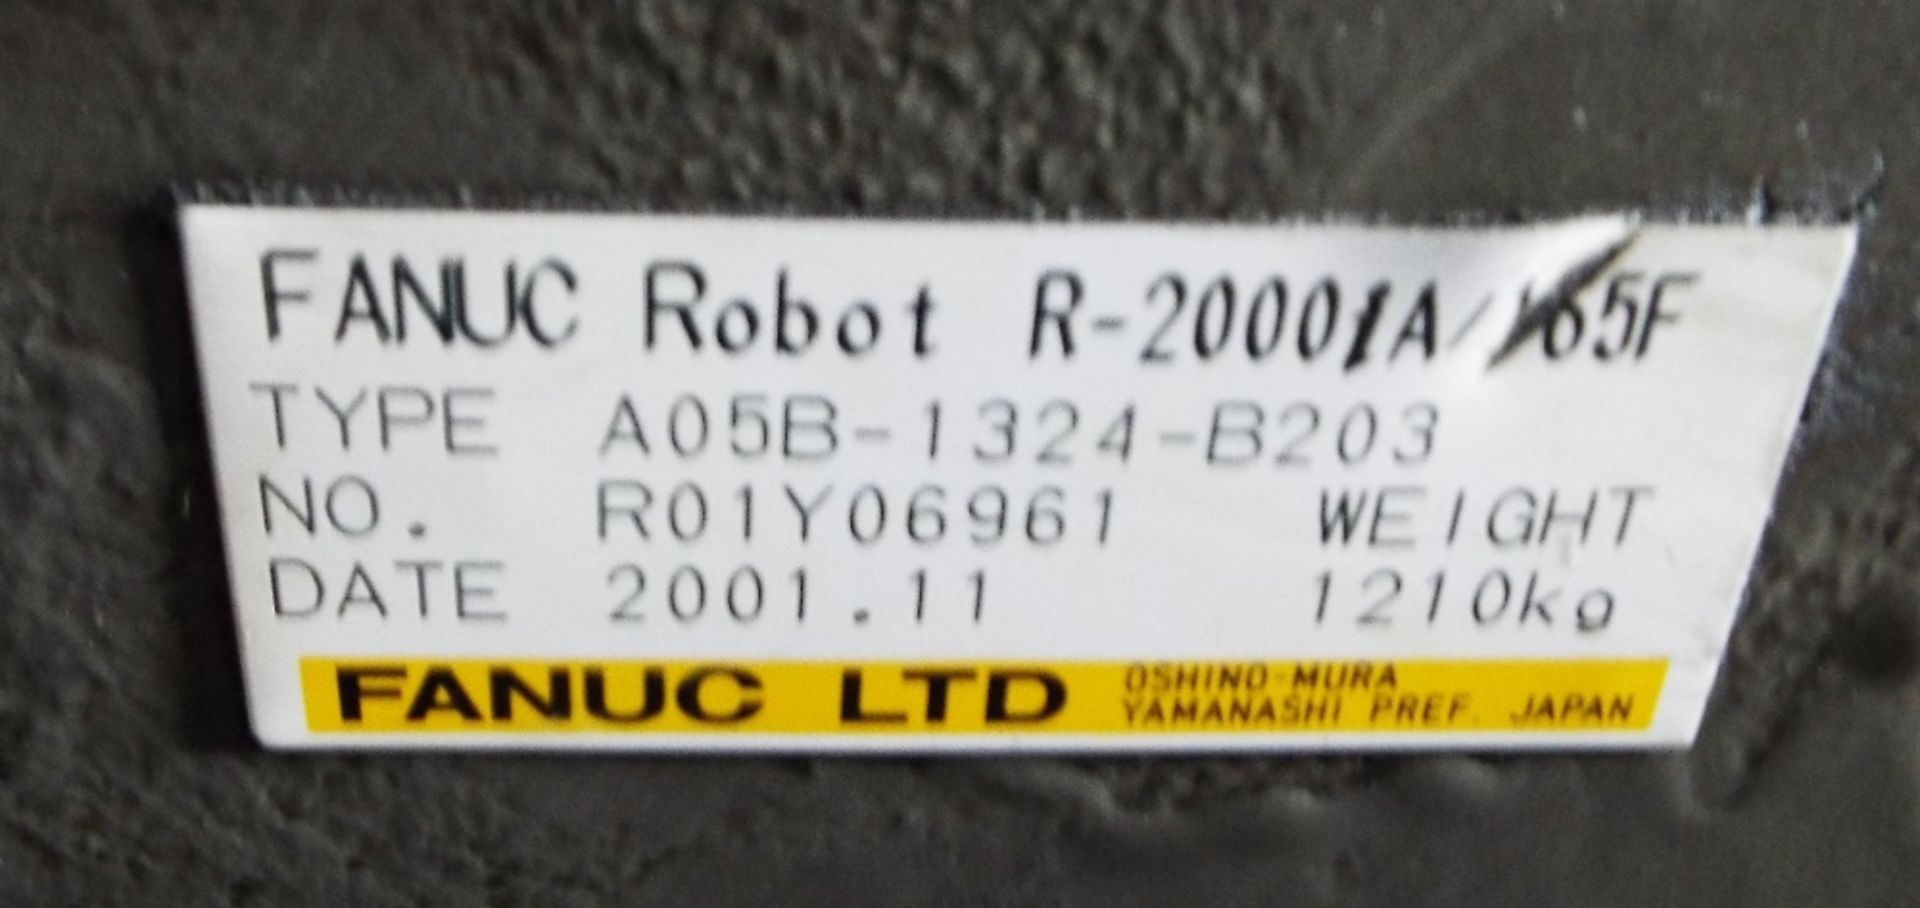 Fanuc Robot Type R-2000iA - 165F 6 Axis Industrial Robot. - Image 5 of 9